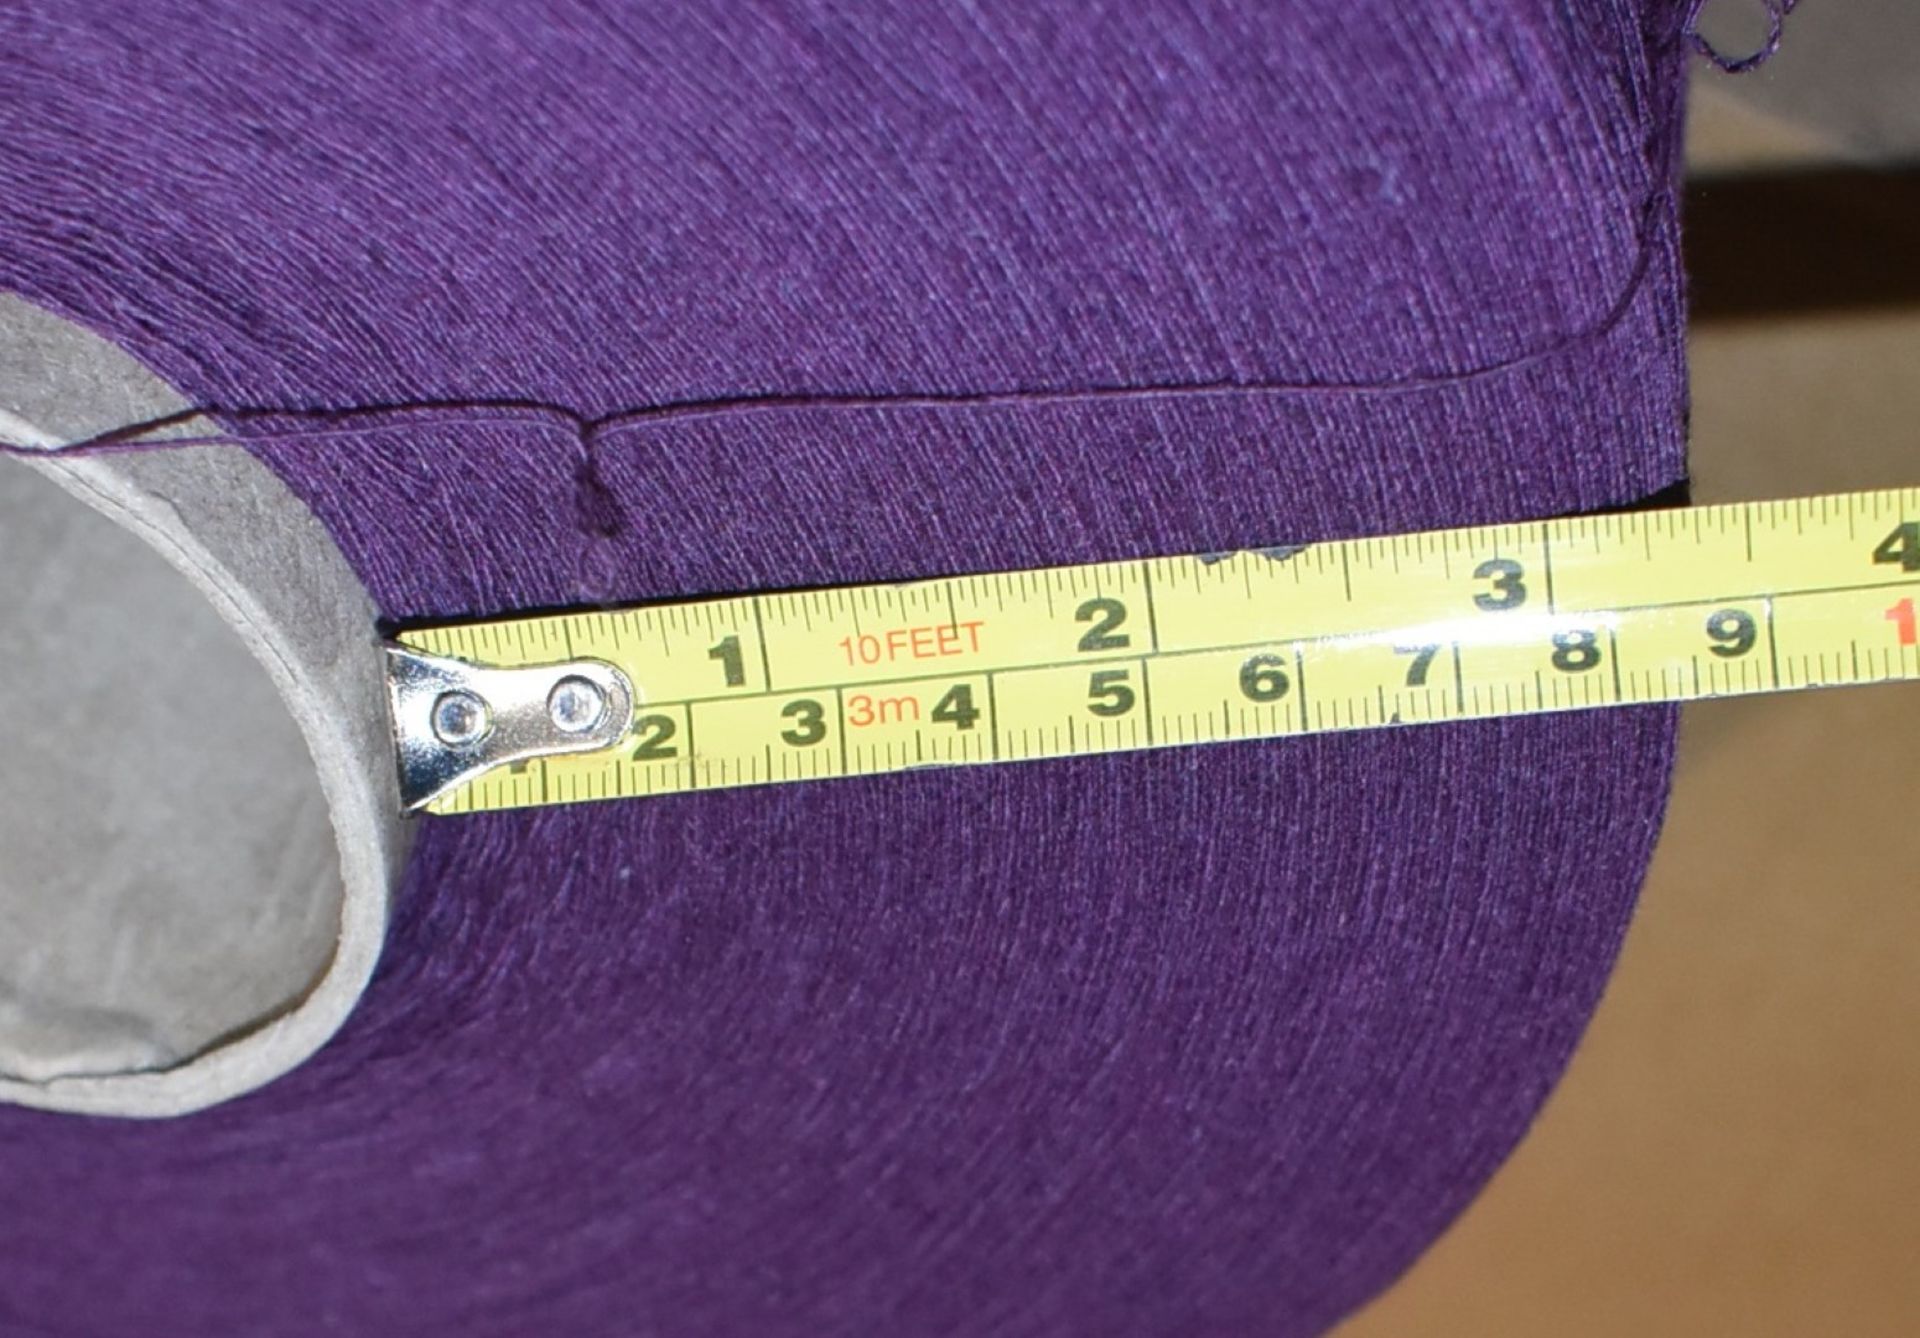 12 x Cones of 1/13 MicroCotton Knitting Yarn - Purple - Approx Weight: 2,300g - New Stock ABL Yarn - Image 9 of 9